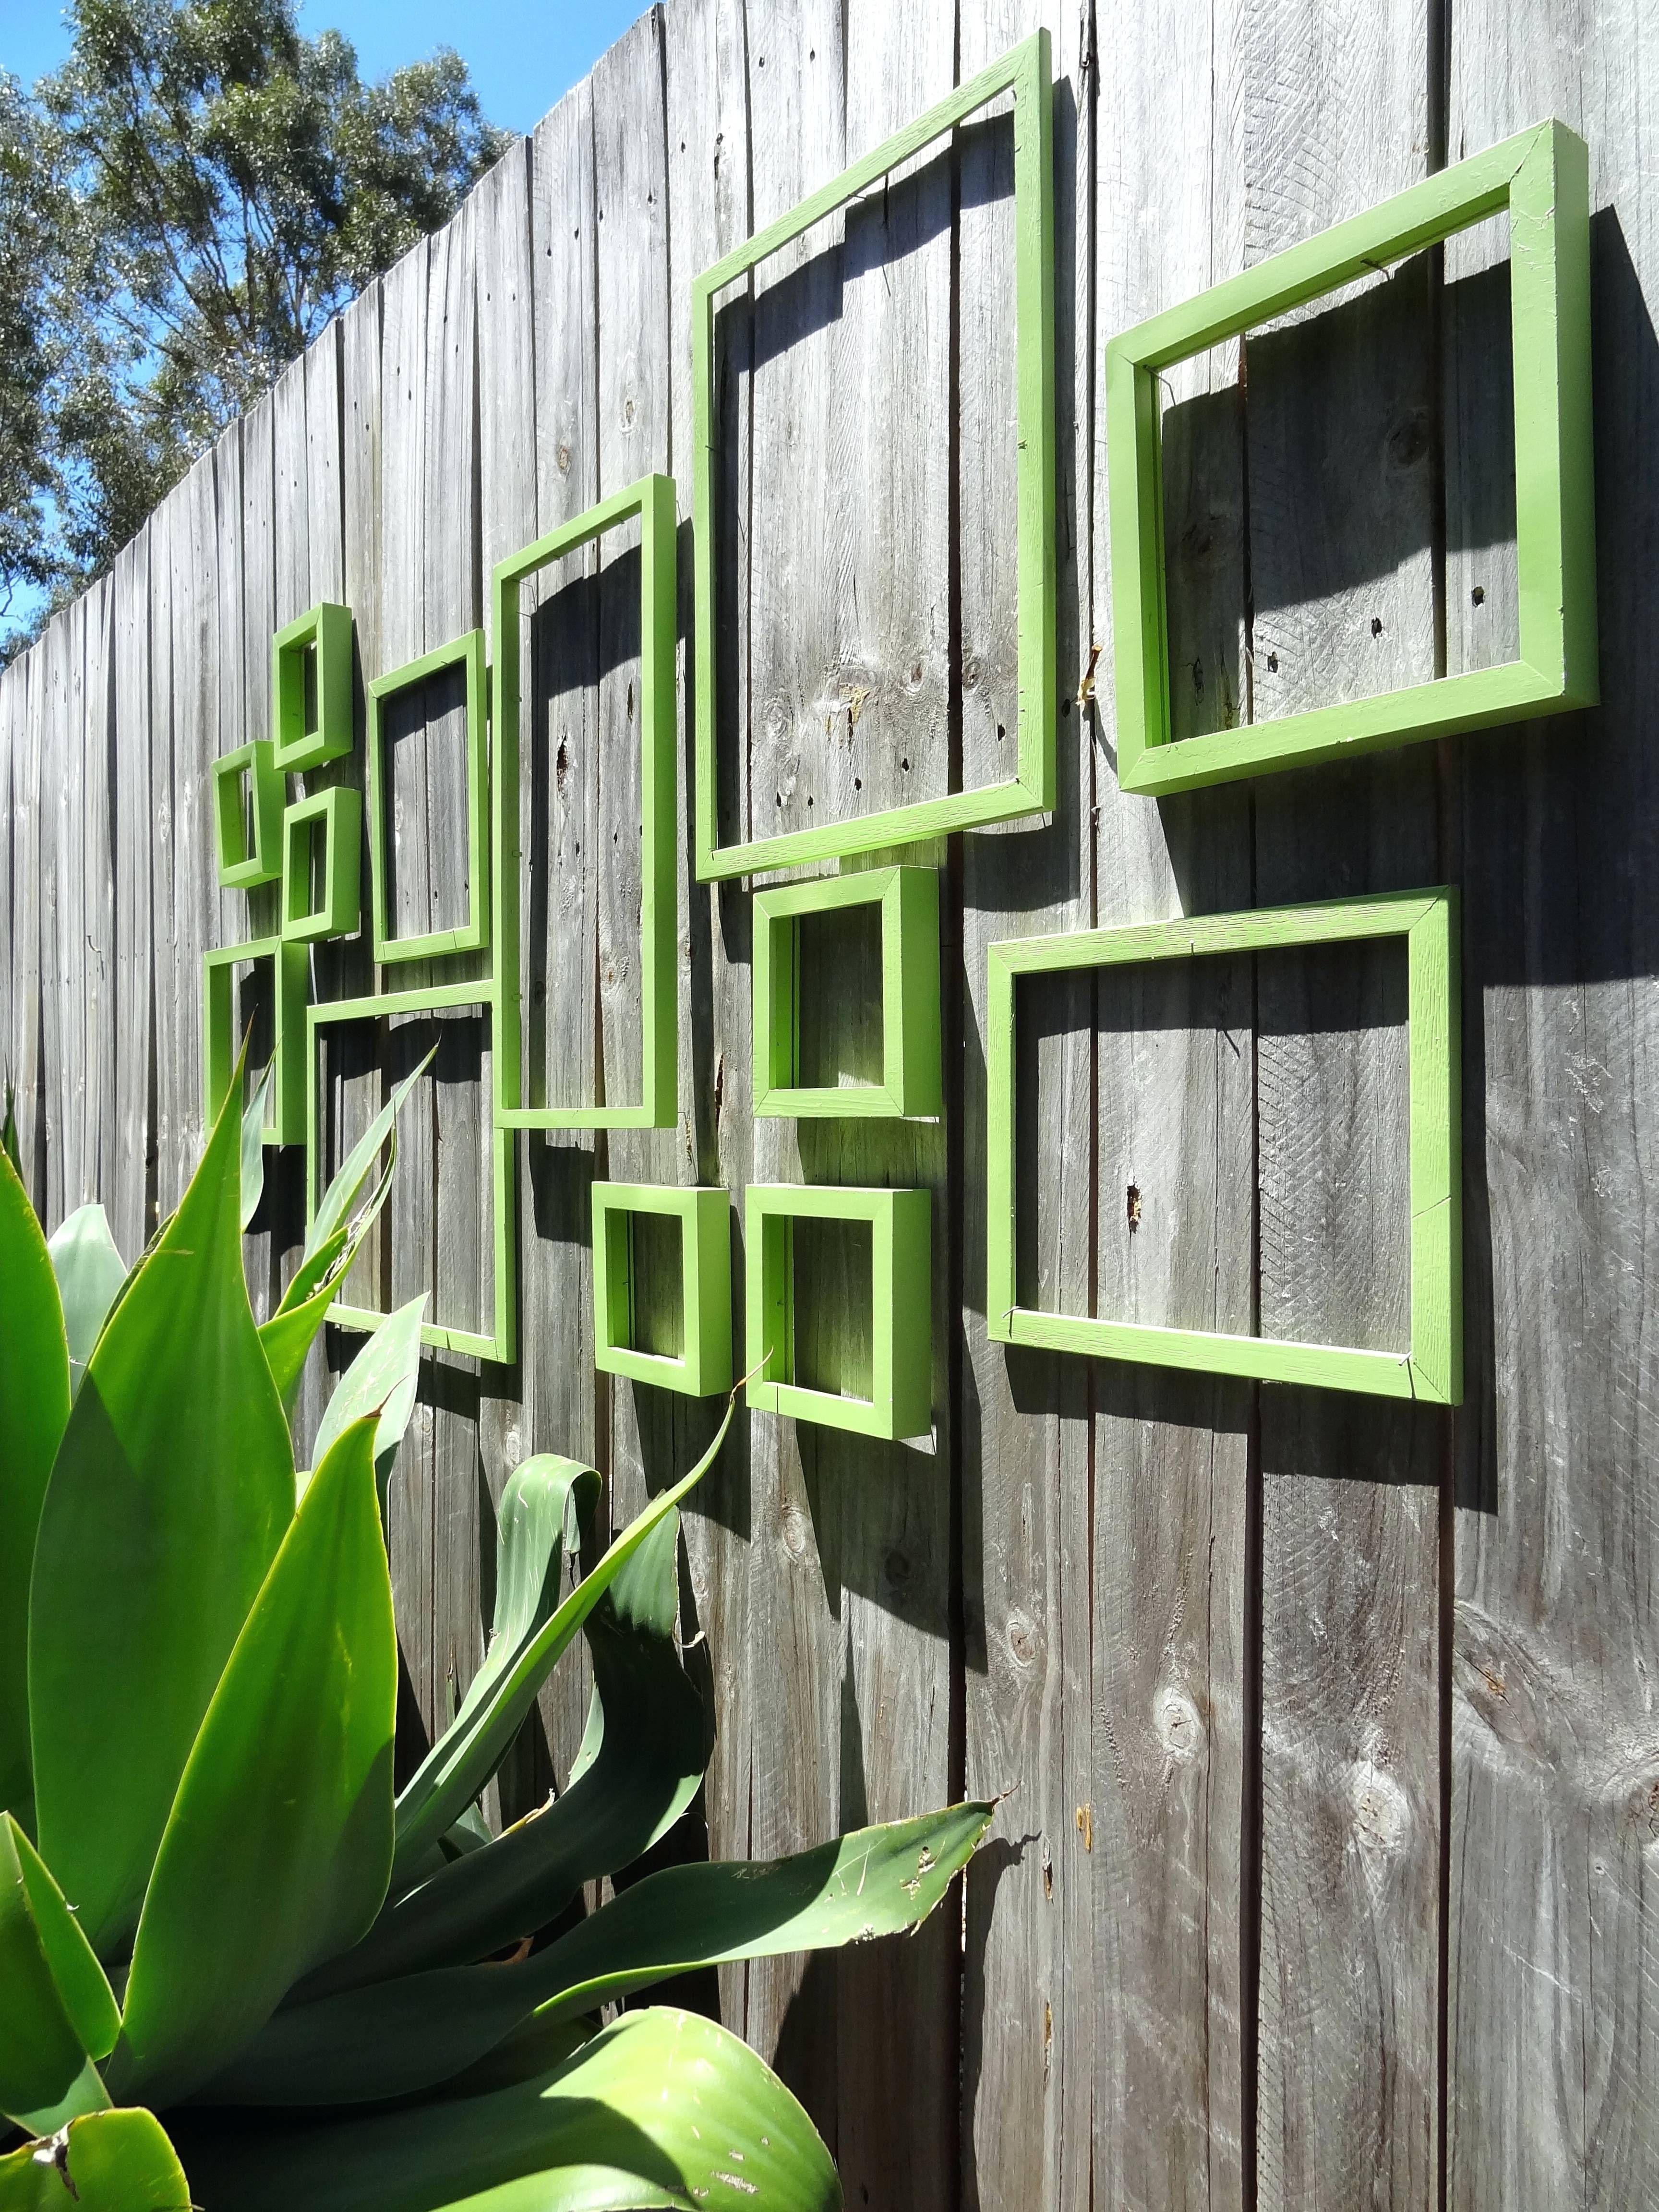 Patio Ideas ~ Outside Wall Decor Ideas Patio Wall Decor Tropical Within Recent Stainless Steel Outdoor Wall Art (View 16 of 20)